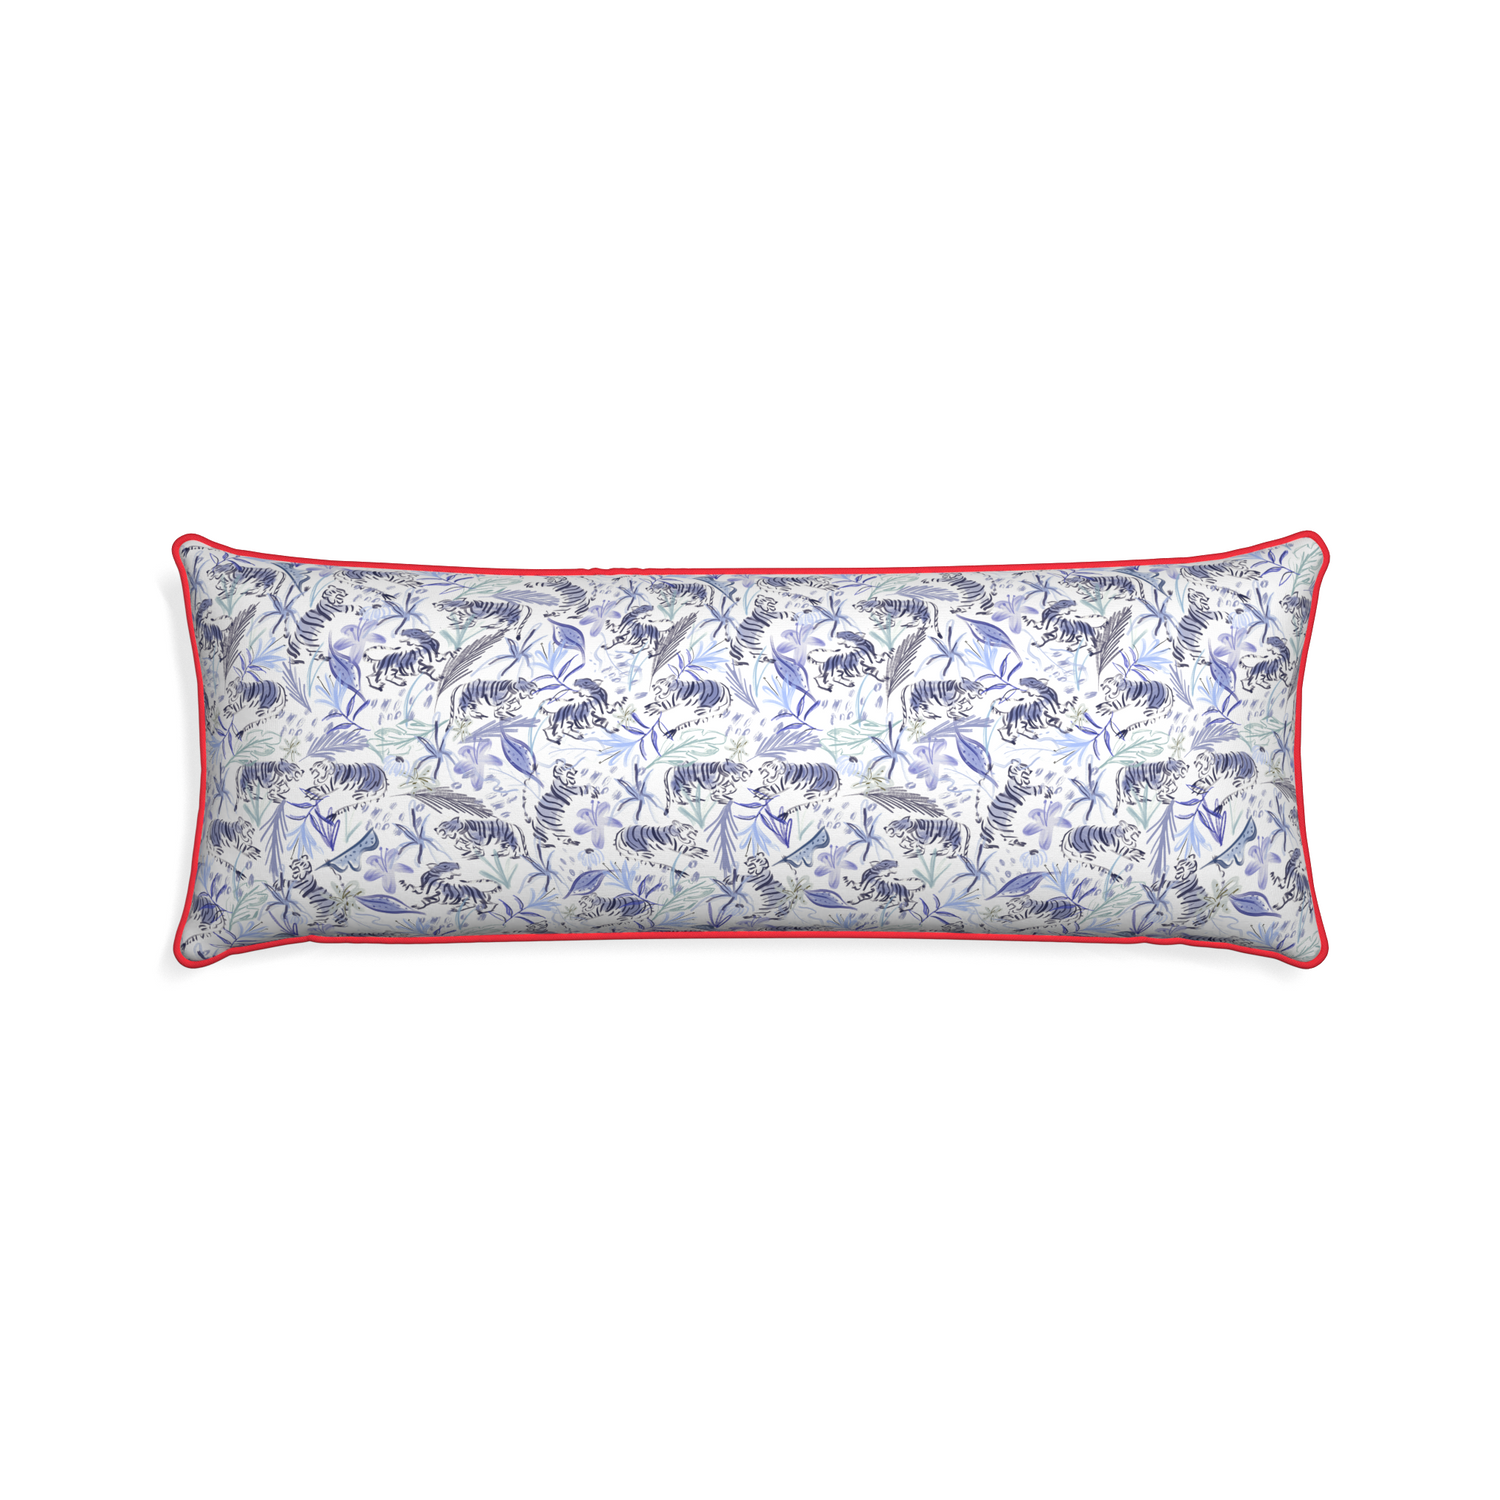 Xl-lumbar frida blue custom blue with intricate tiger designpillow with cherry piping on white background